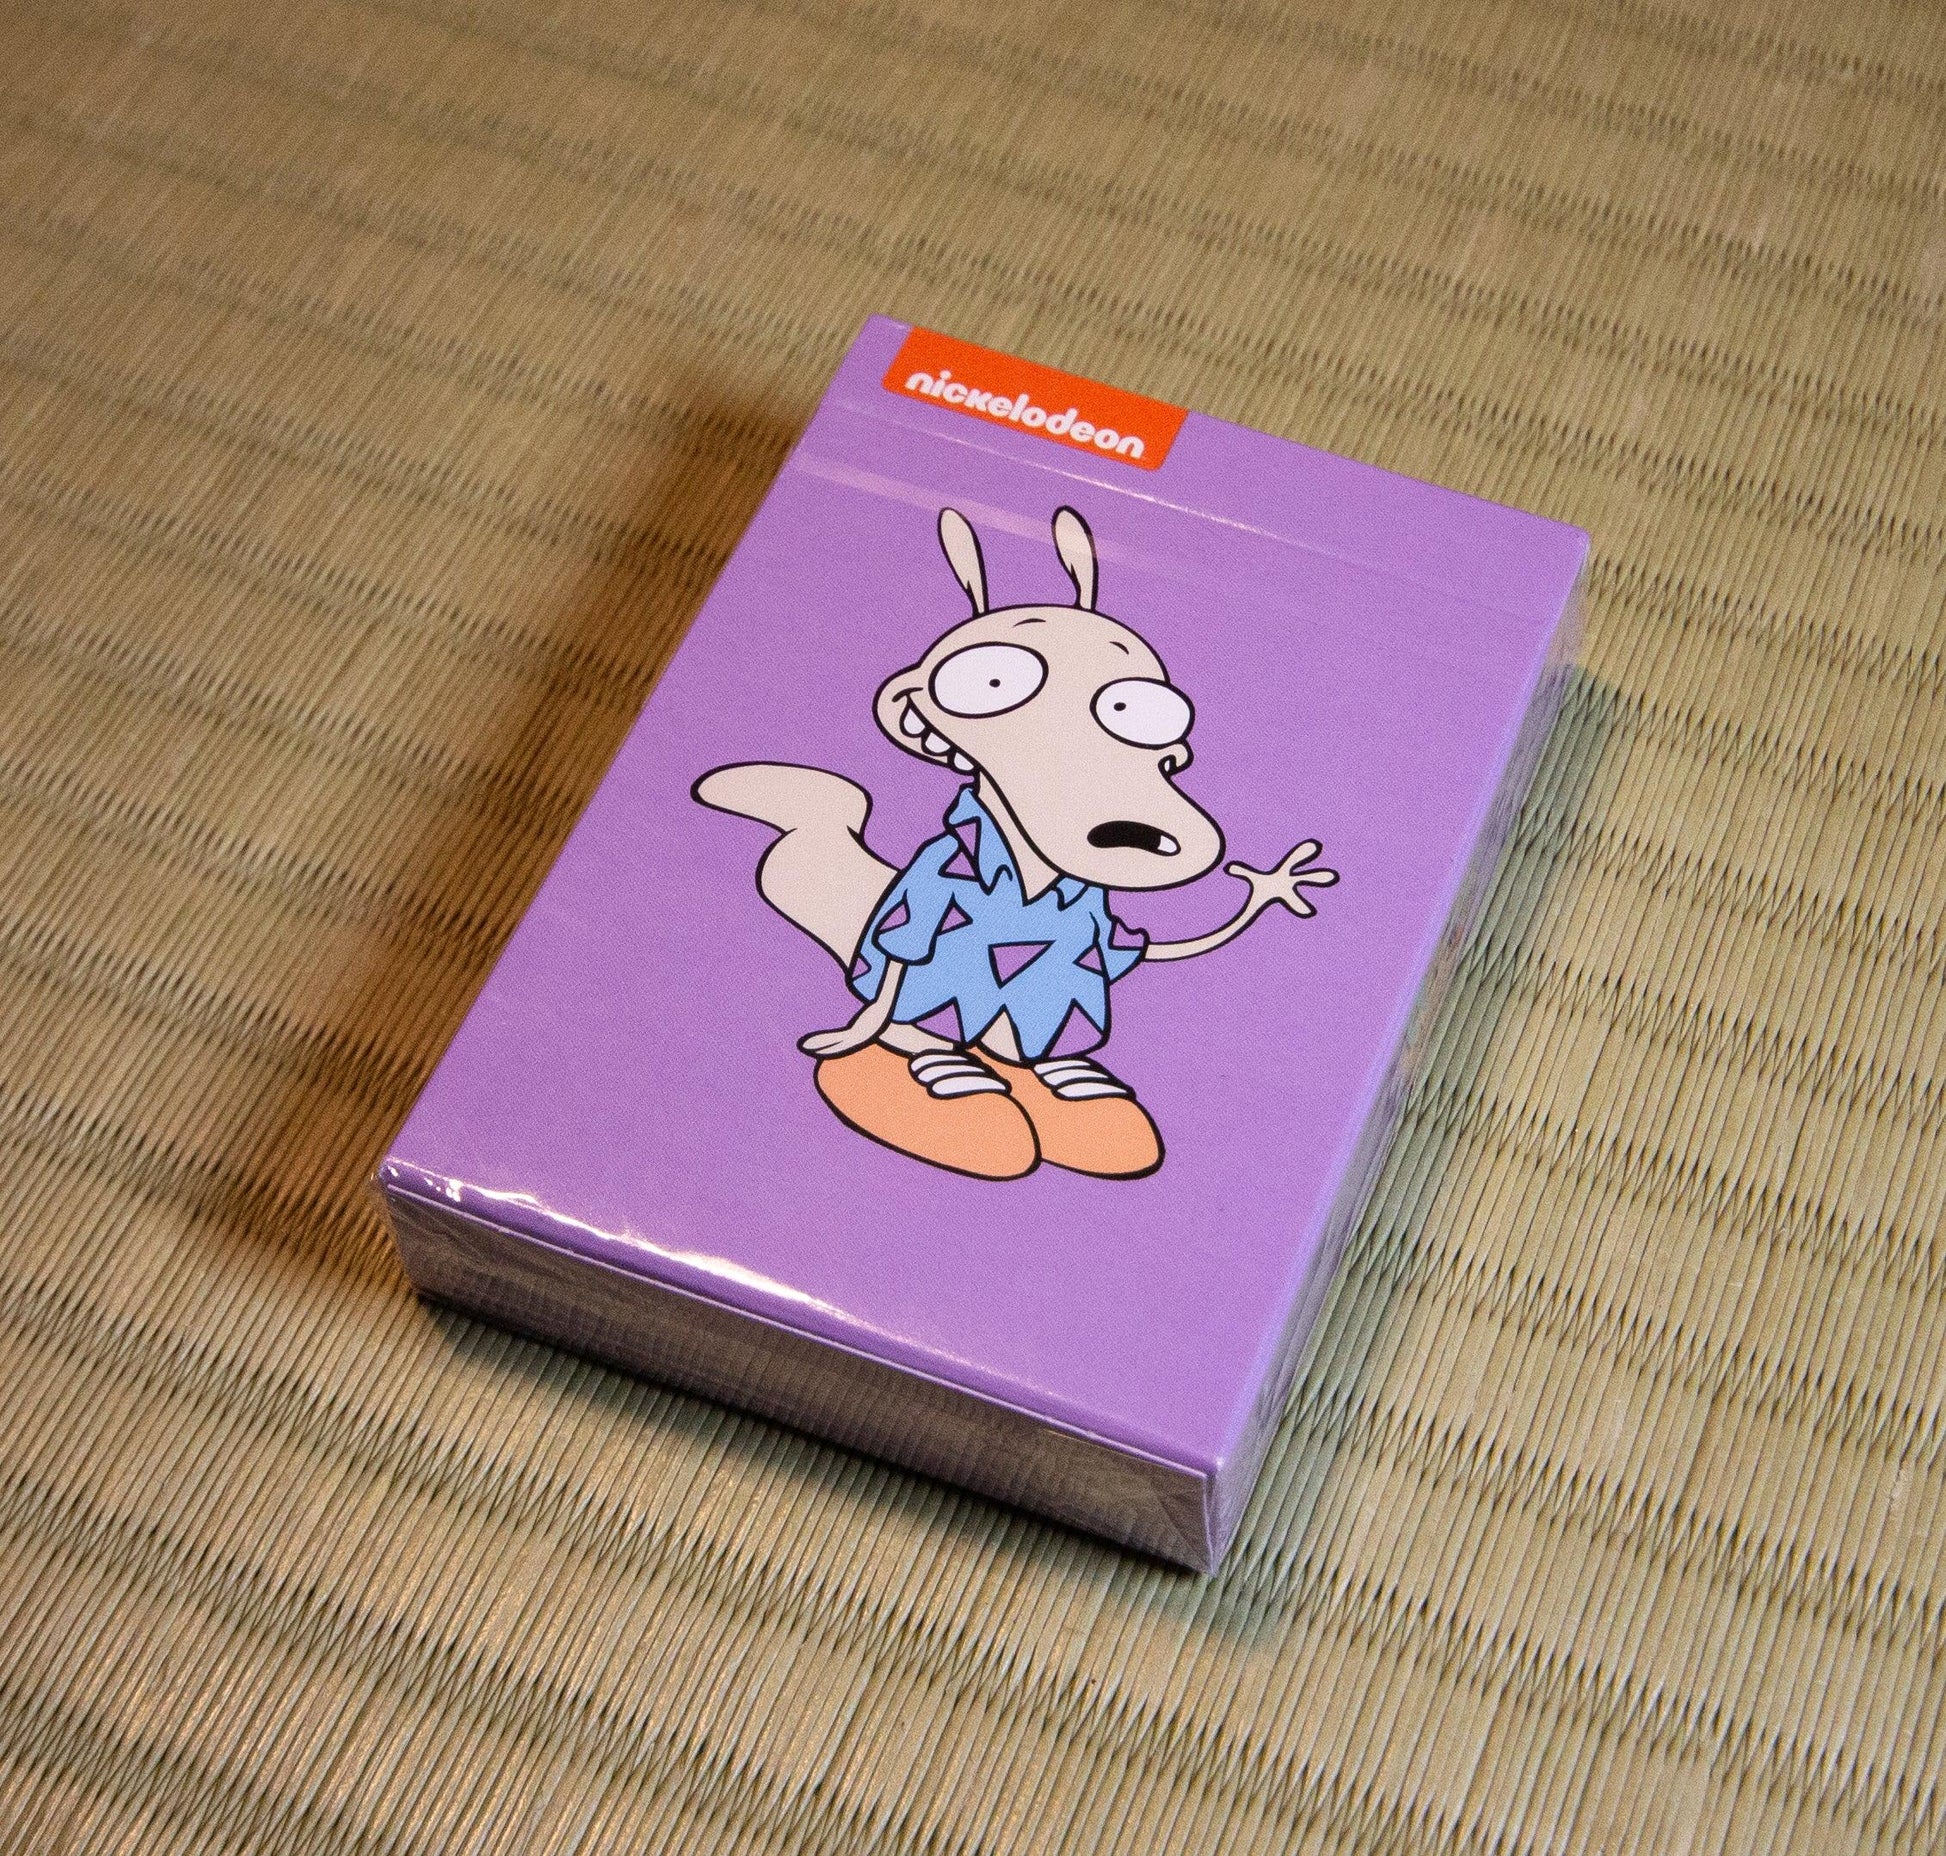 Rocko's Modern Life Playing Cards by Fontaine Cards - Deckita Decks